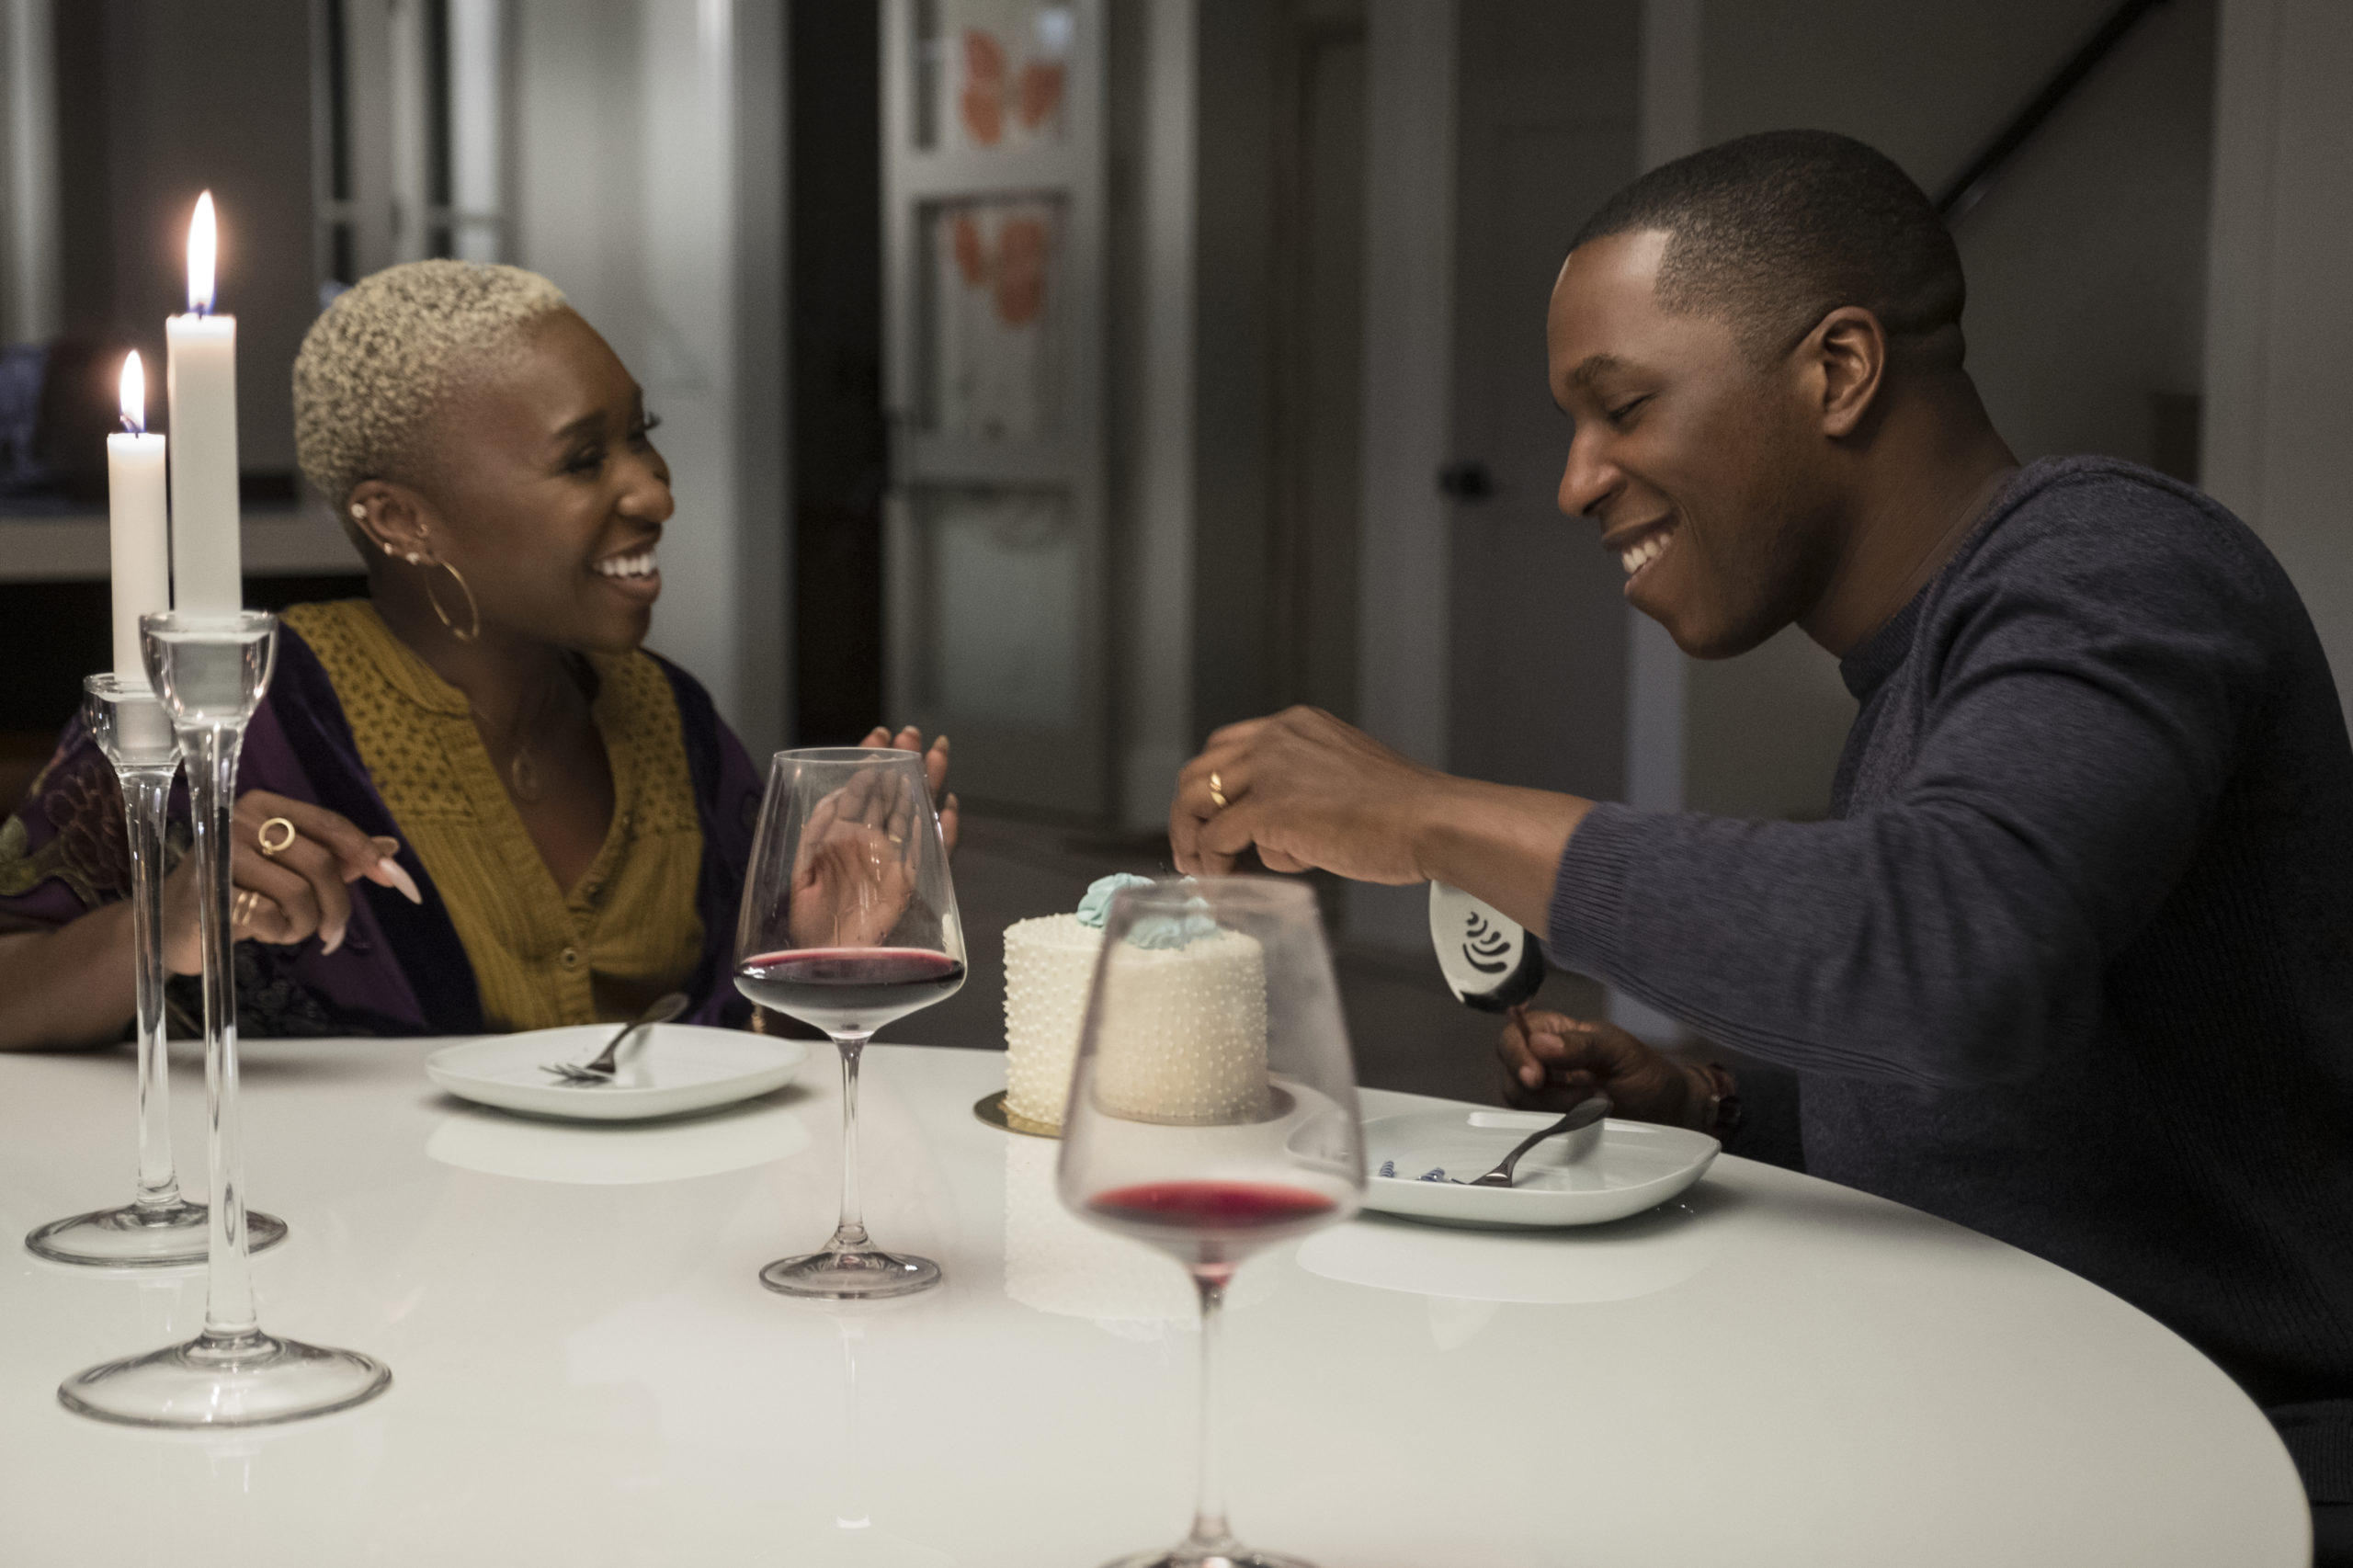 Needle In A Timestack Trailer Has Leslie Odom Jr. in a Romantic Time Warp